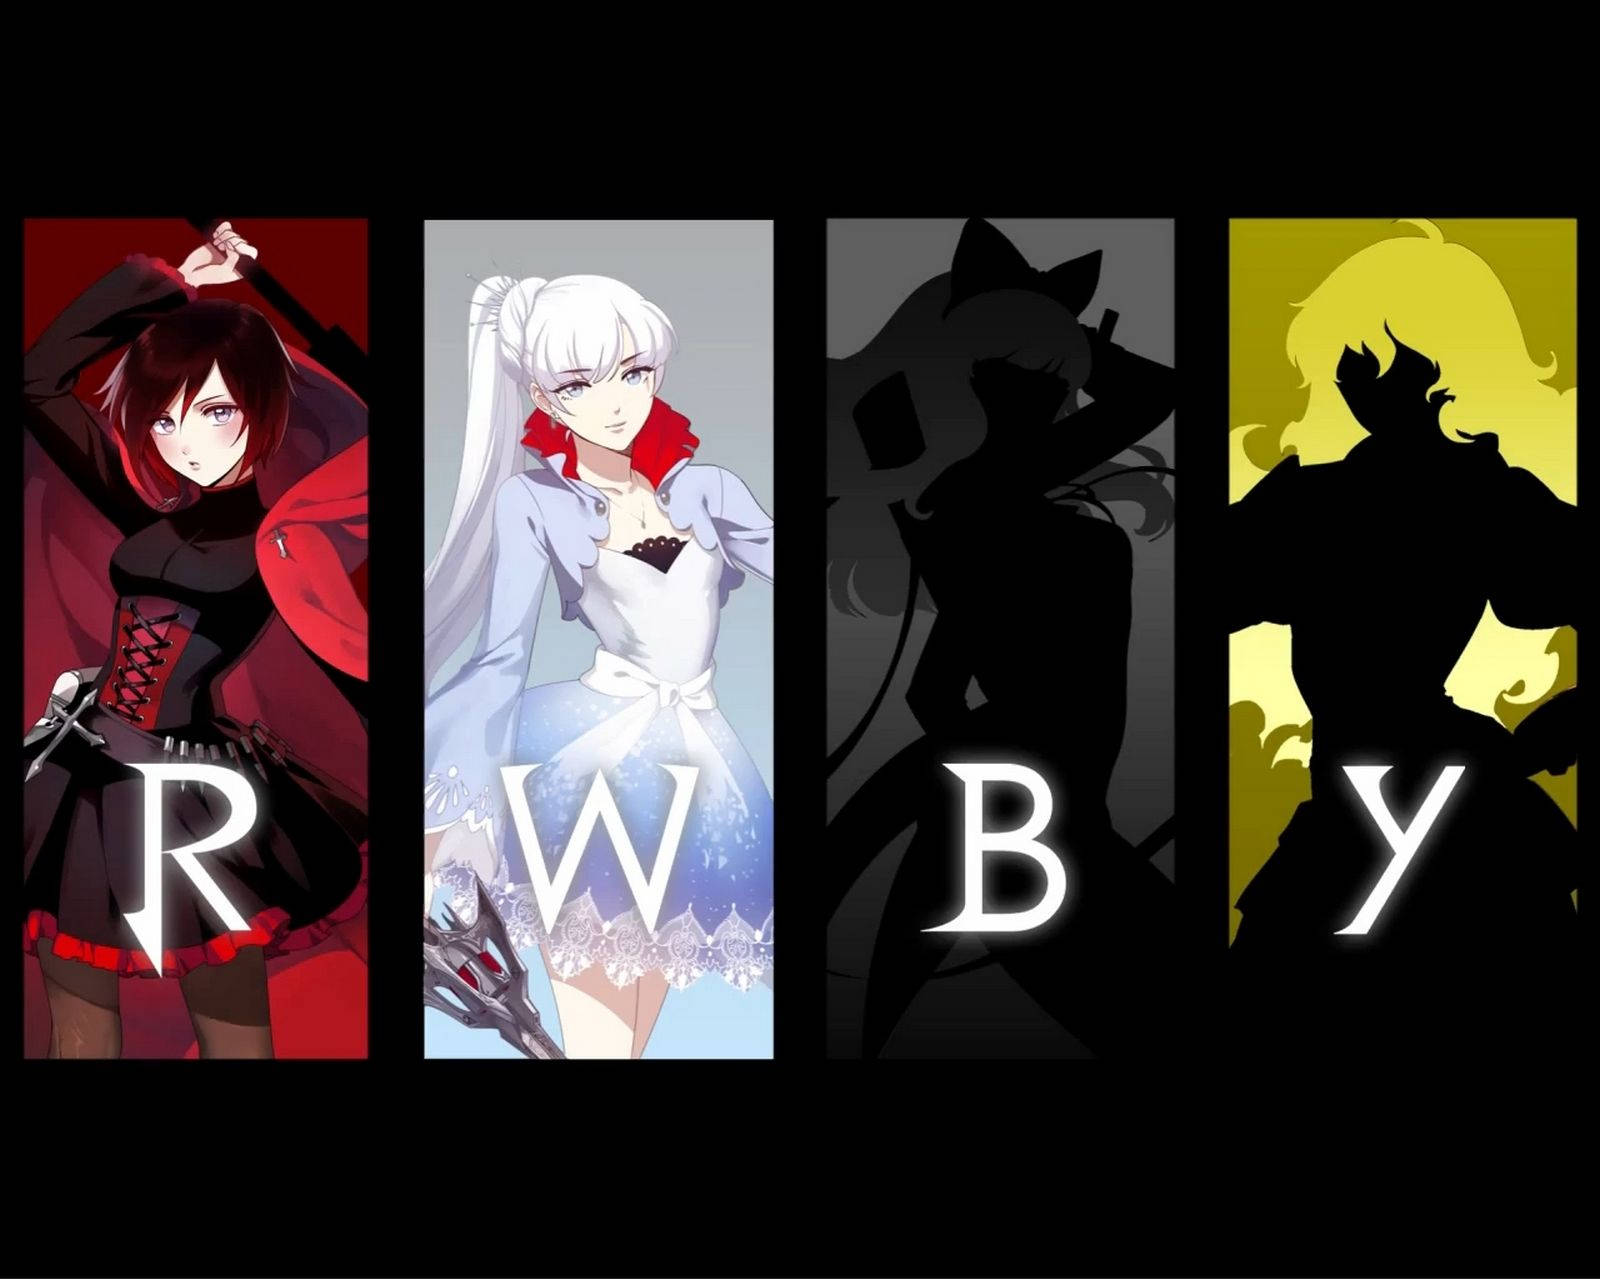 Rwby Face Reveal Trailer Background